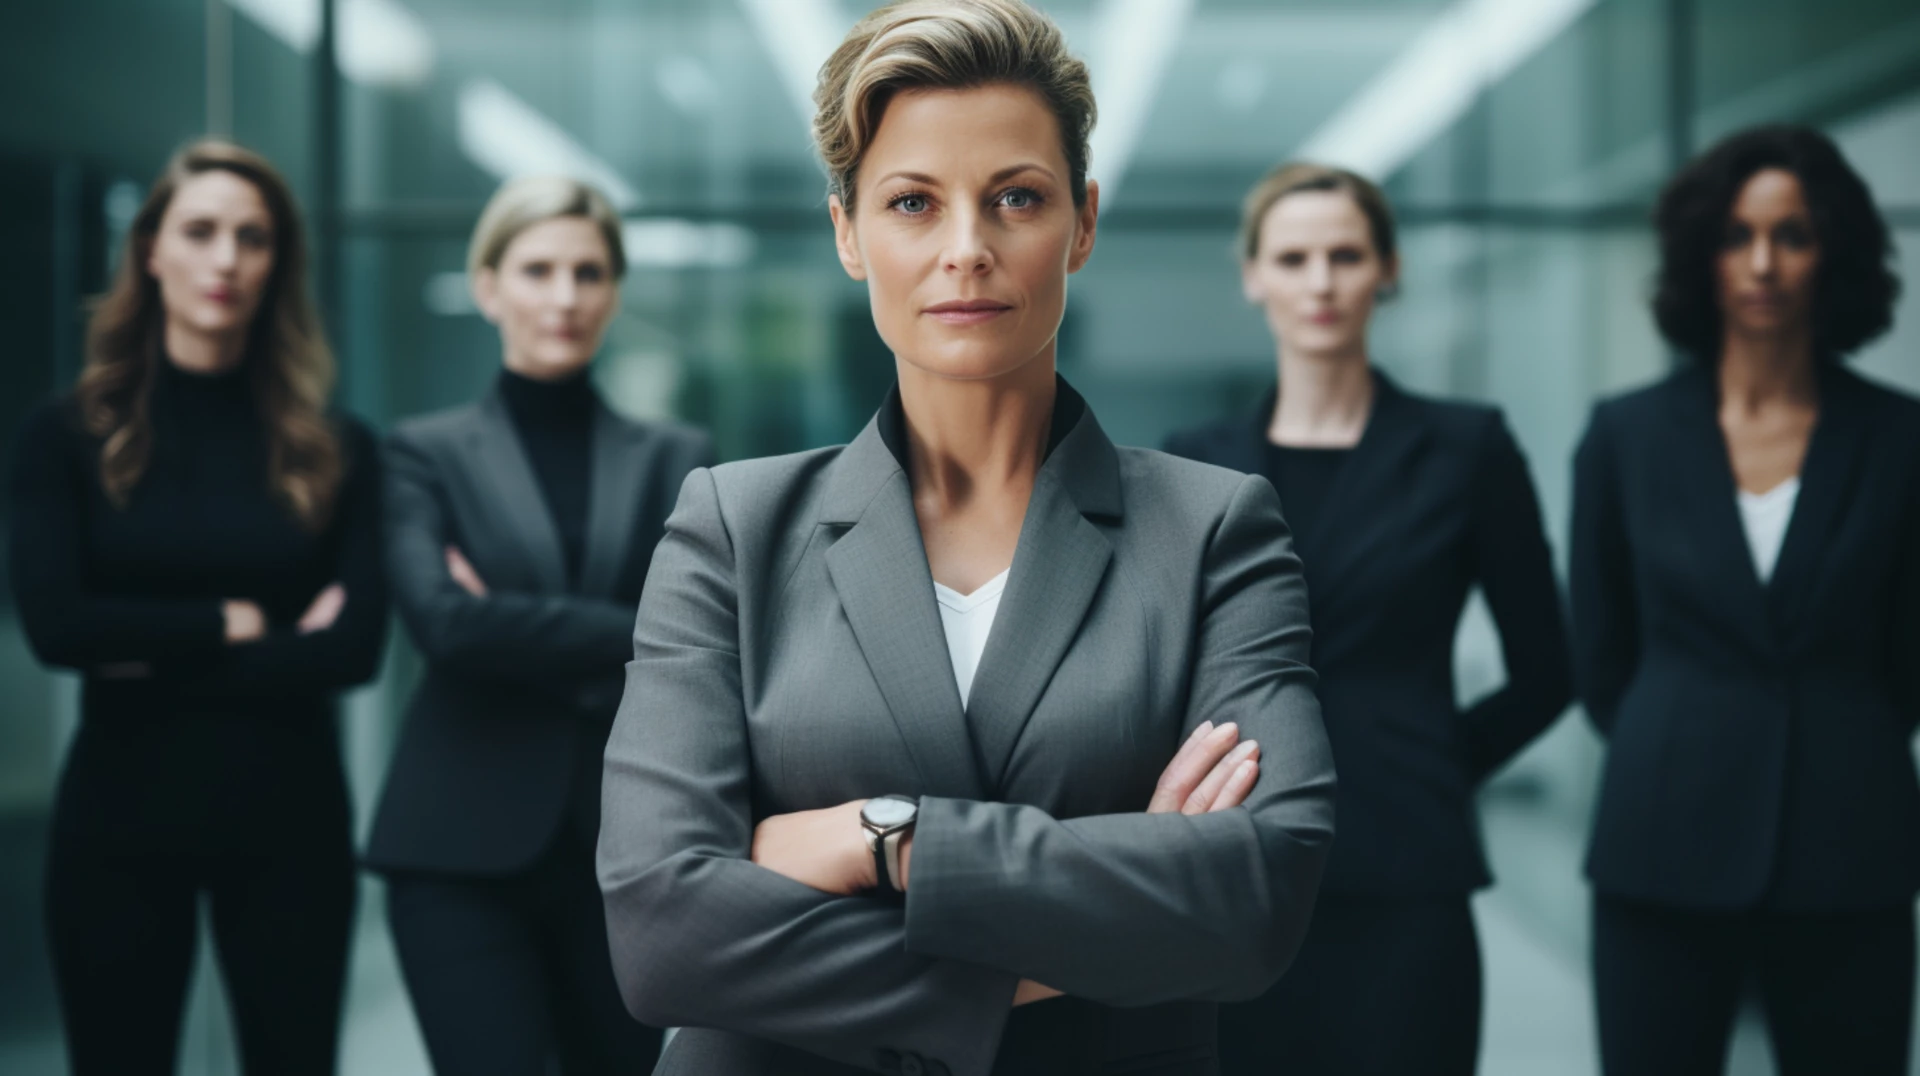 A new era in corporate culture is being shaped by the rise of more female leaders.